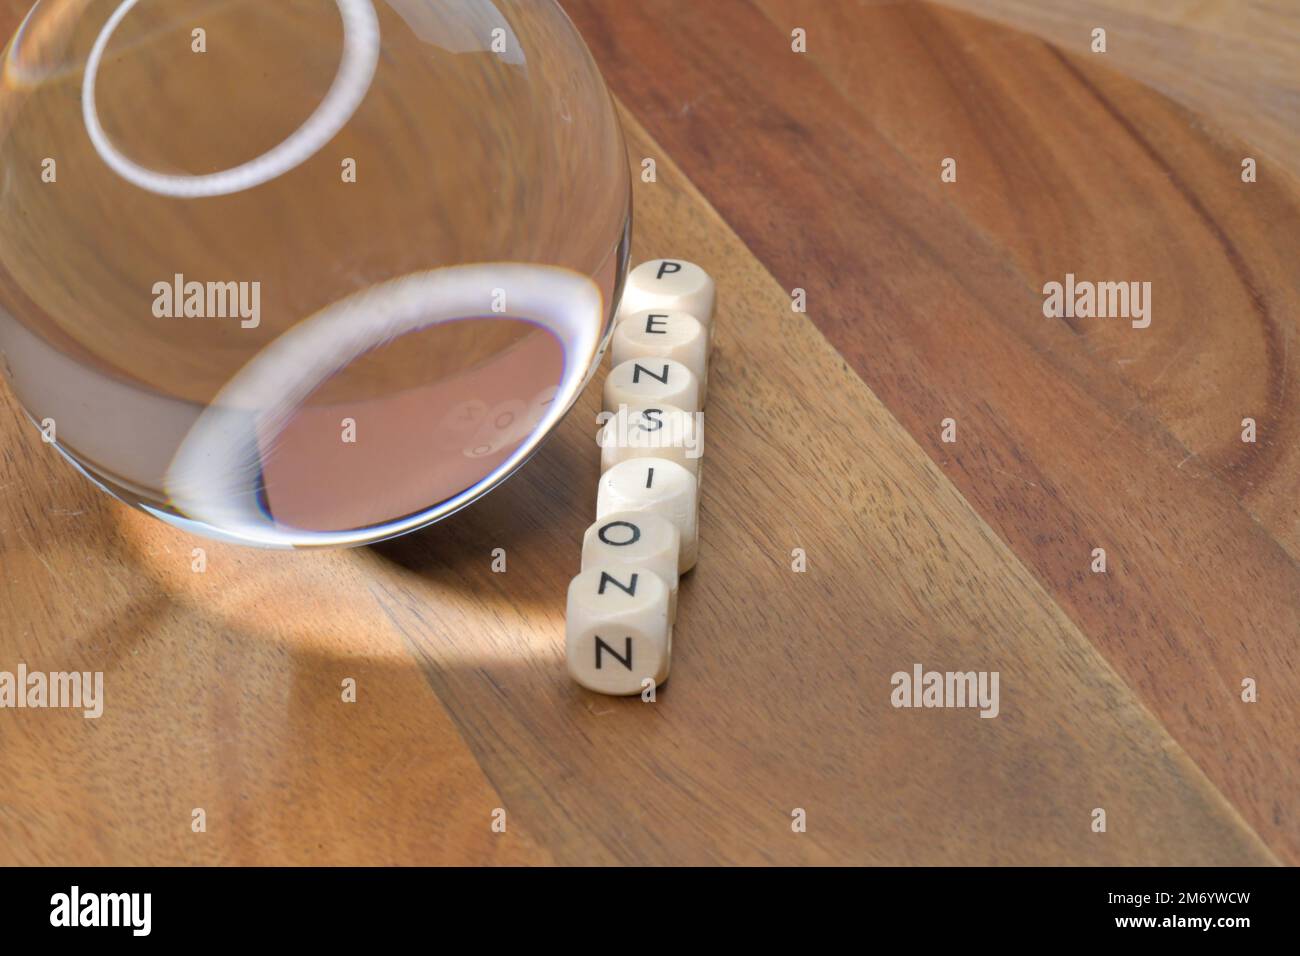 A crystal ball next to a row of block letters spelling out the word pension, future of pension, financing retirees, future prediction of pension value Stock Photo